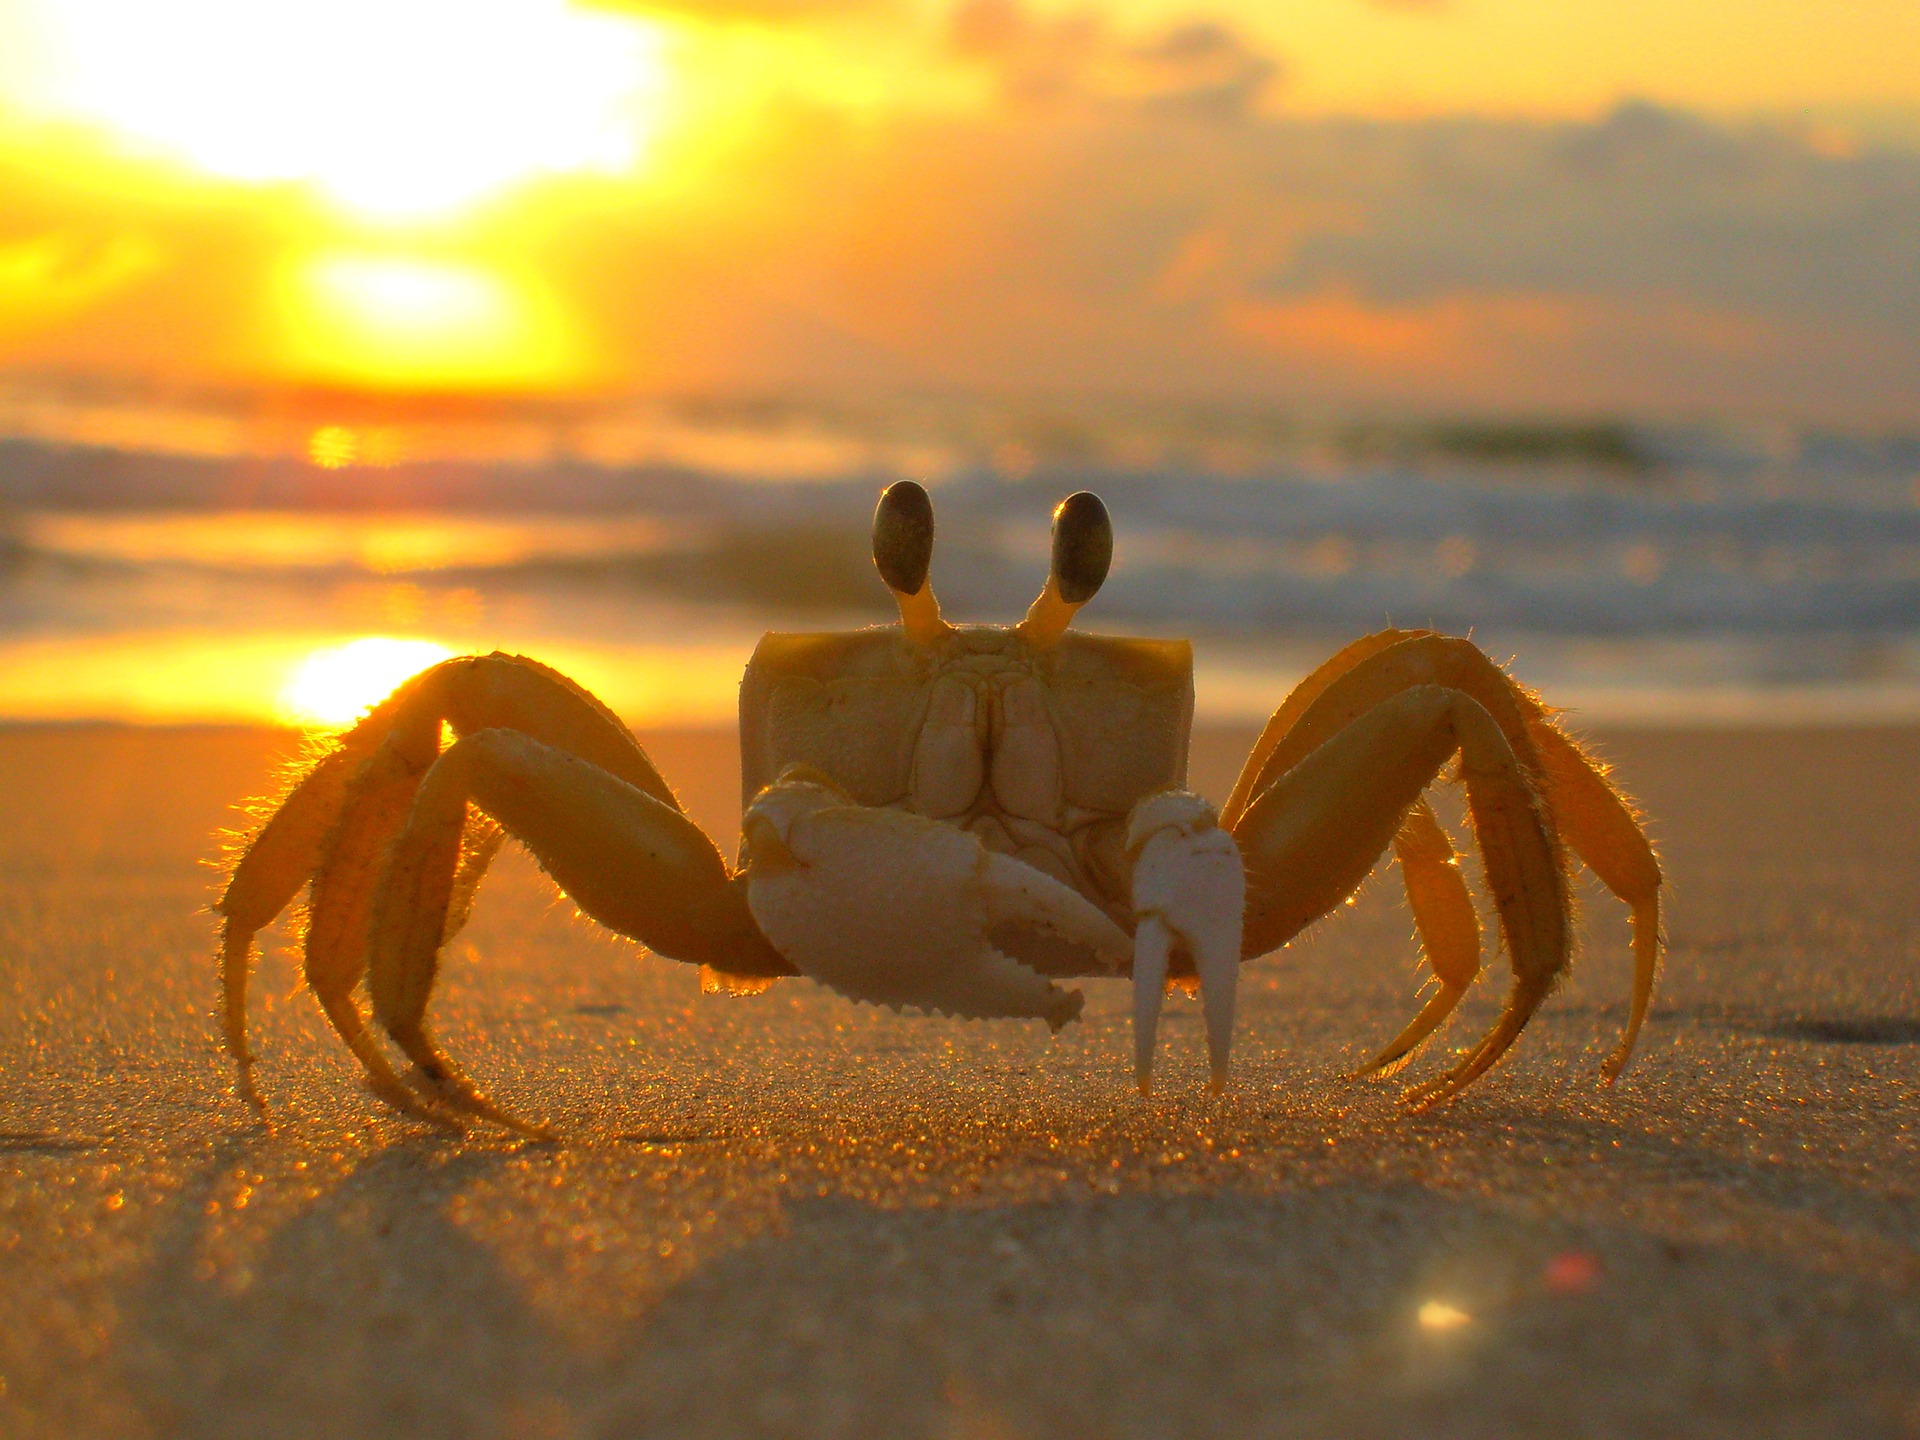 Crab next to a sunset on a beach